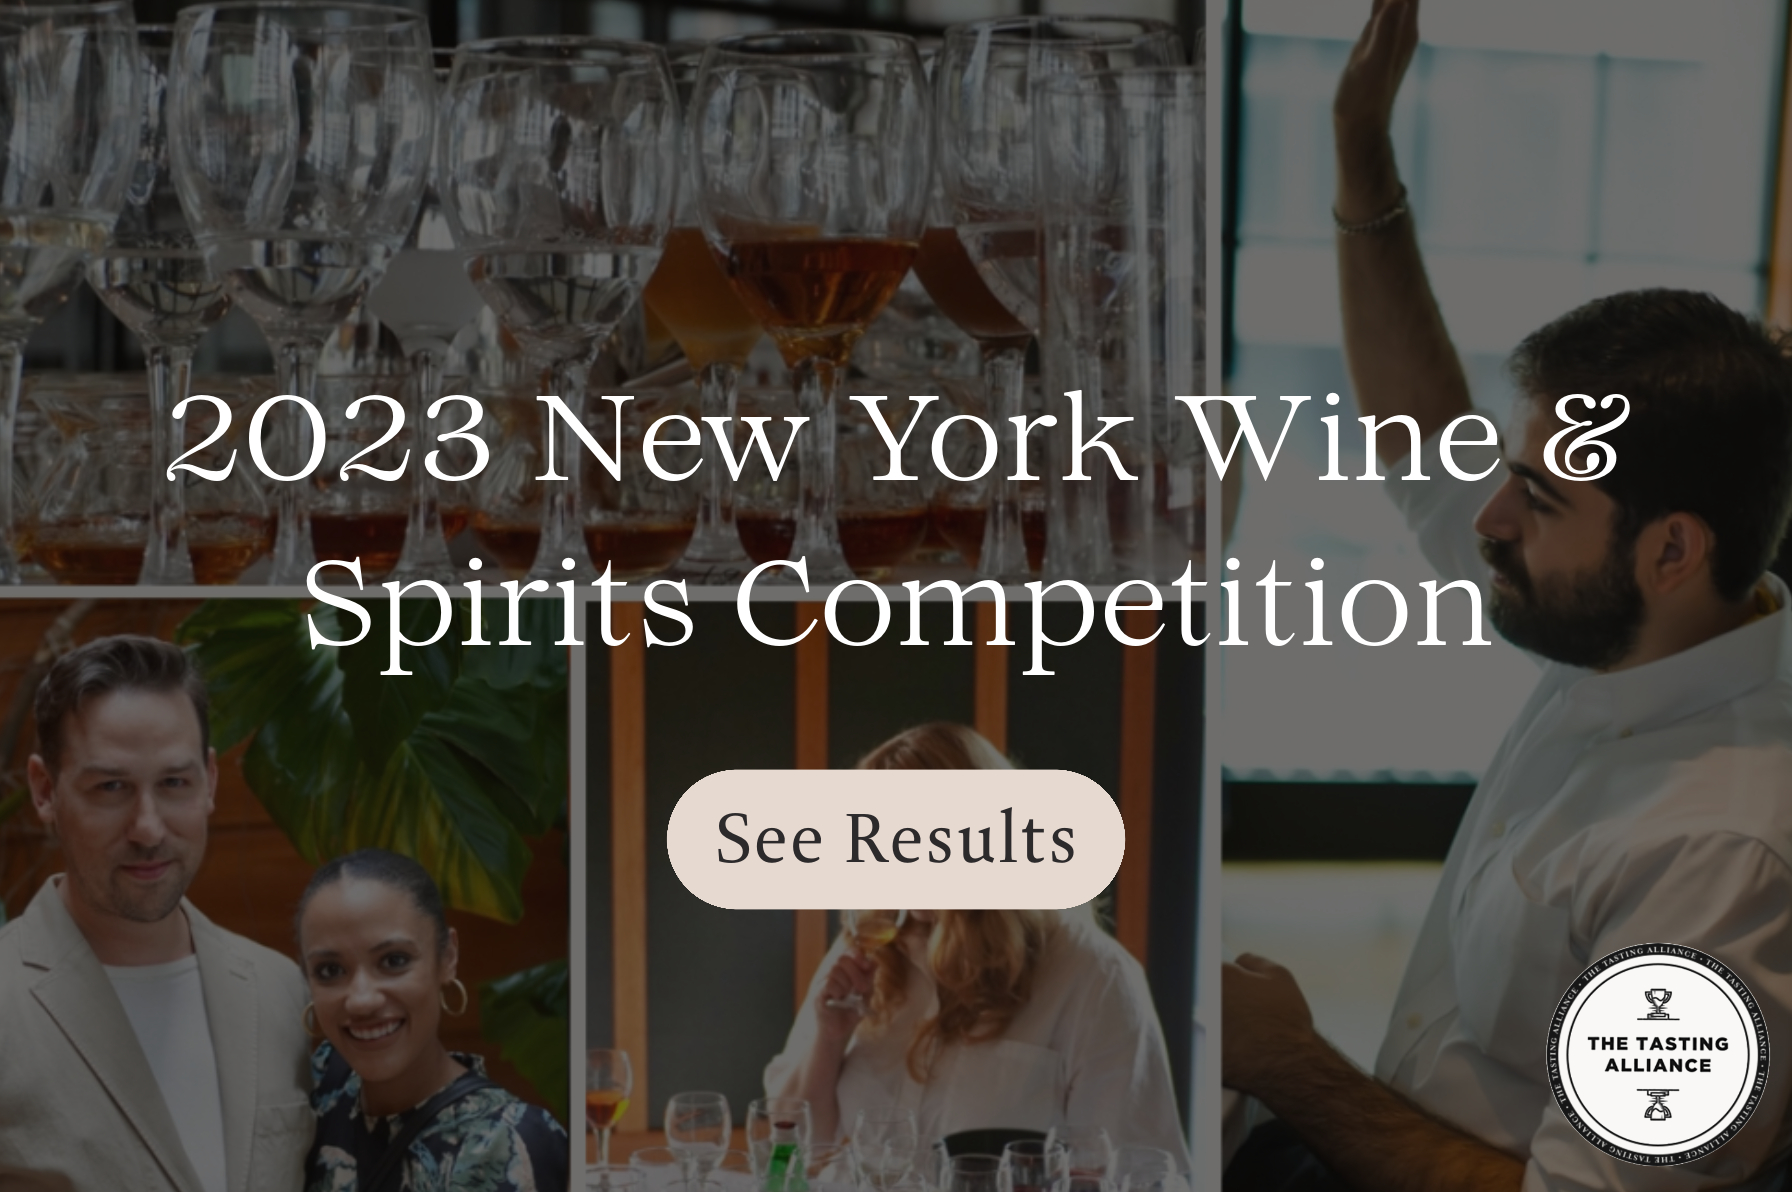 The results of The Tasting Alliance's New York World Wine & Spirits Competition